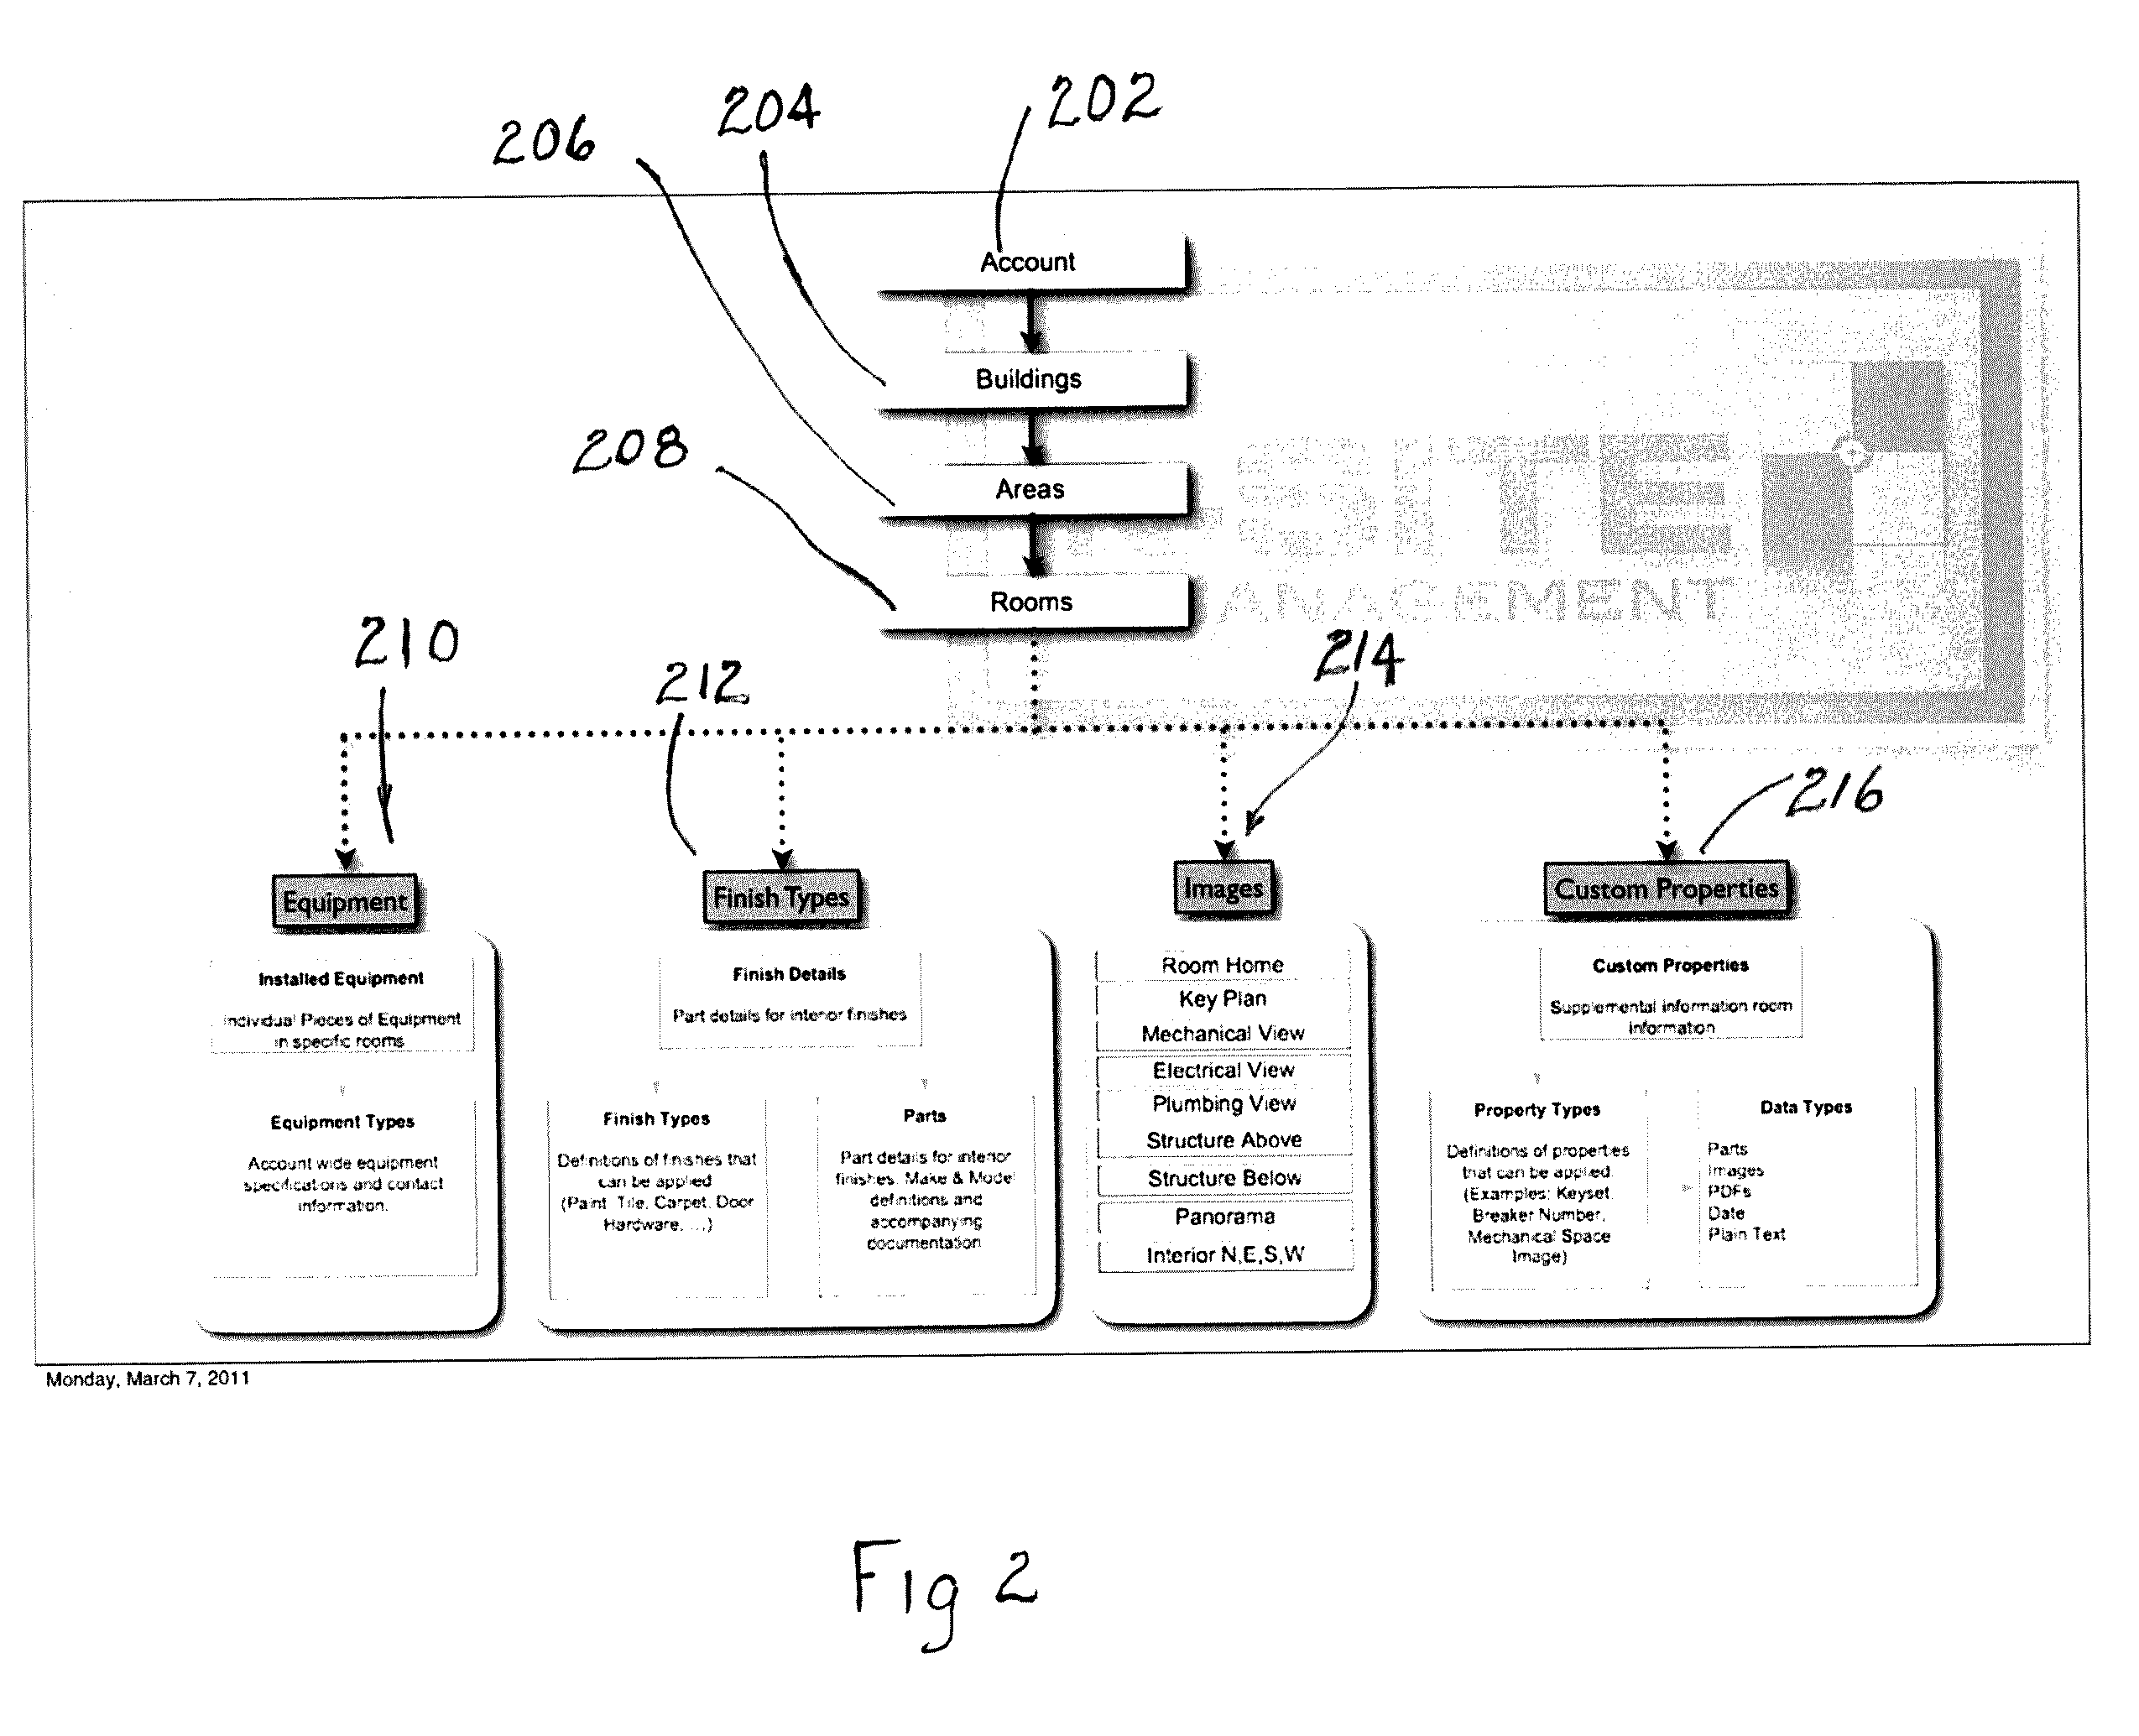 System and method for monitoring and managing information